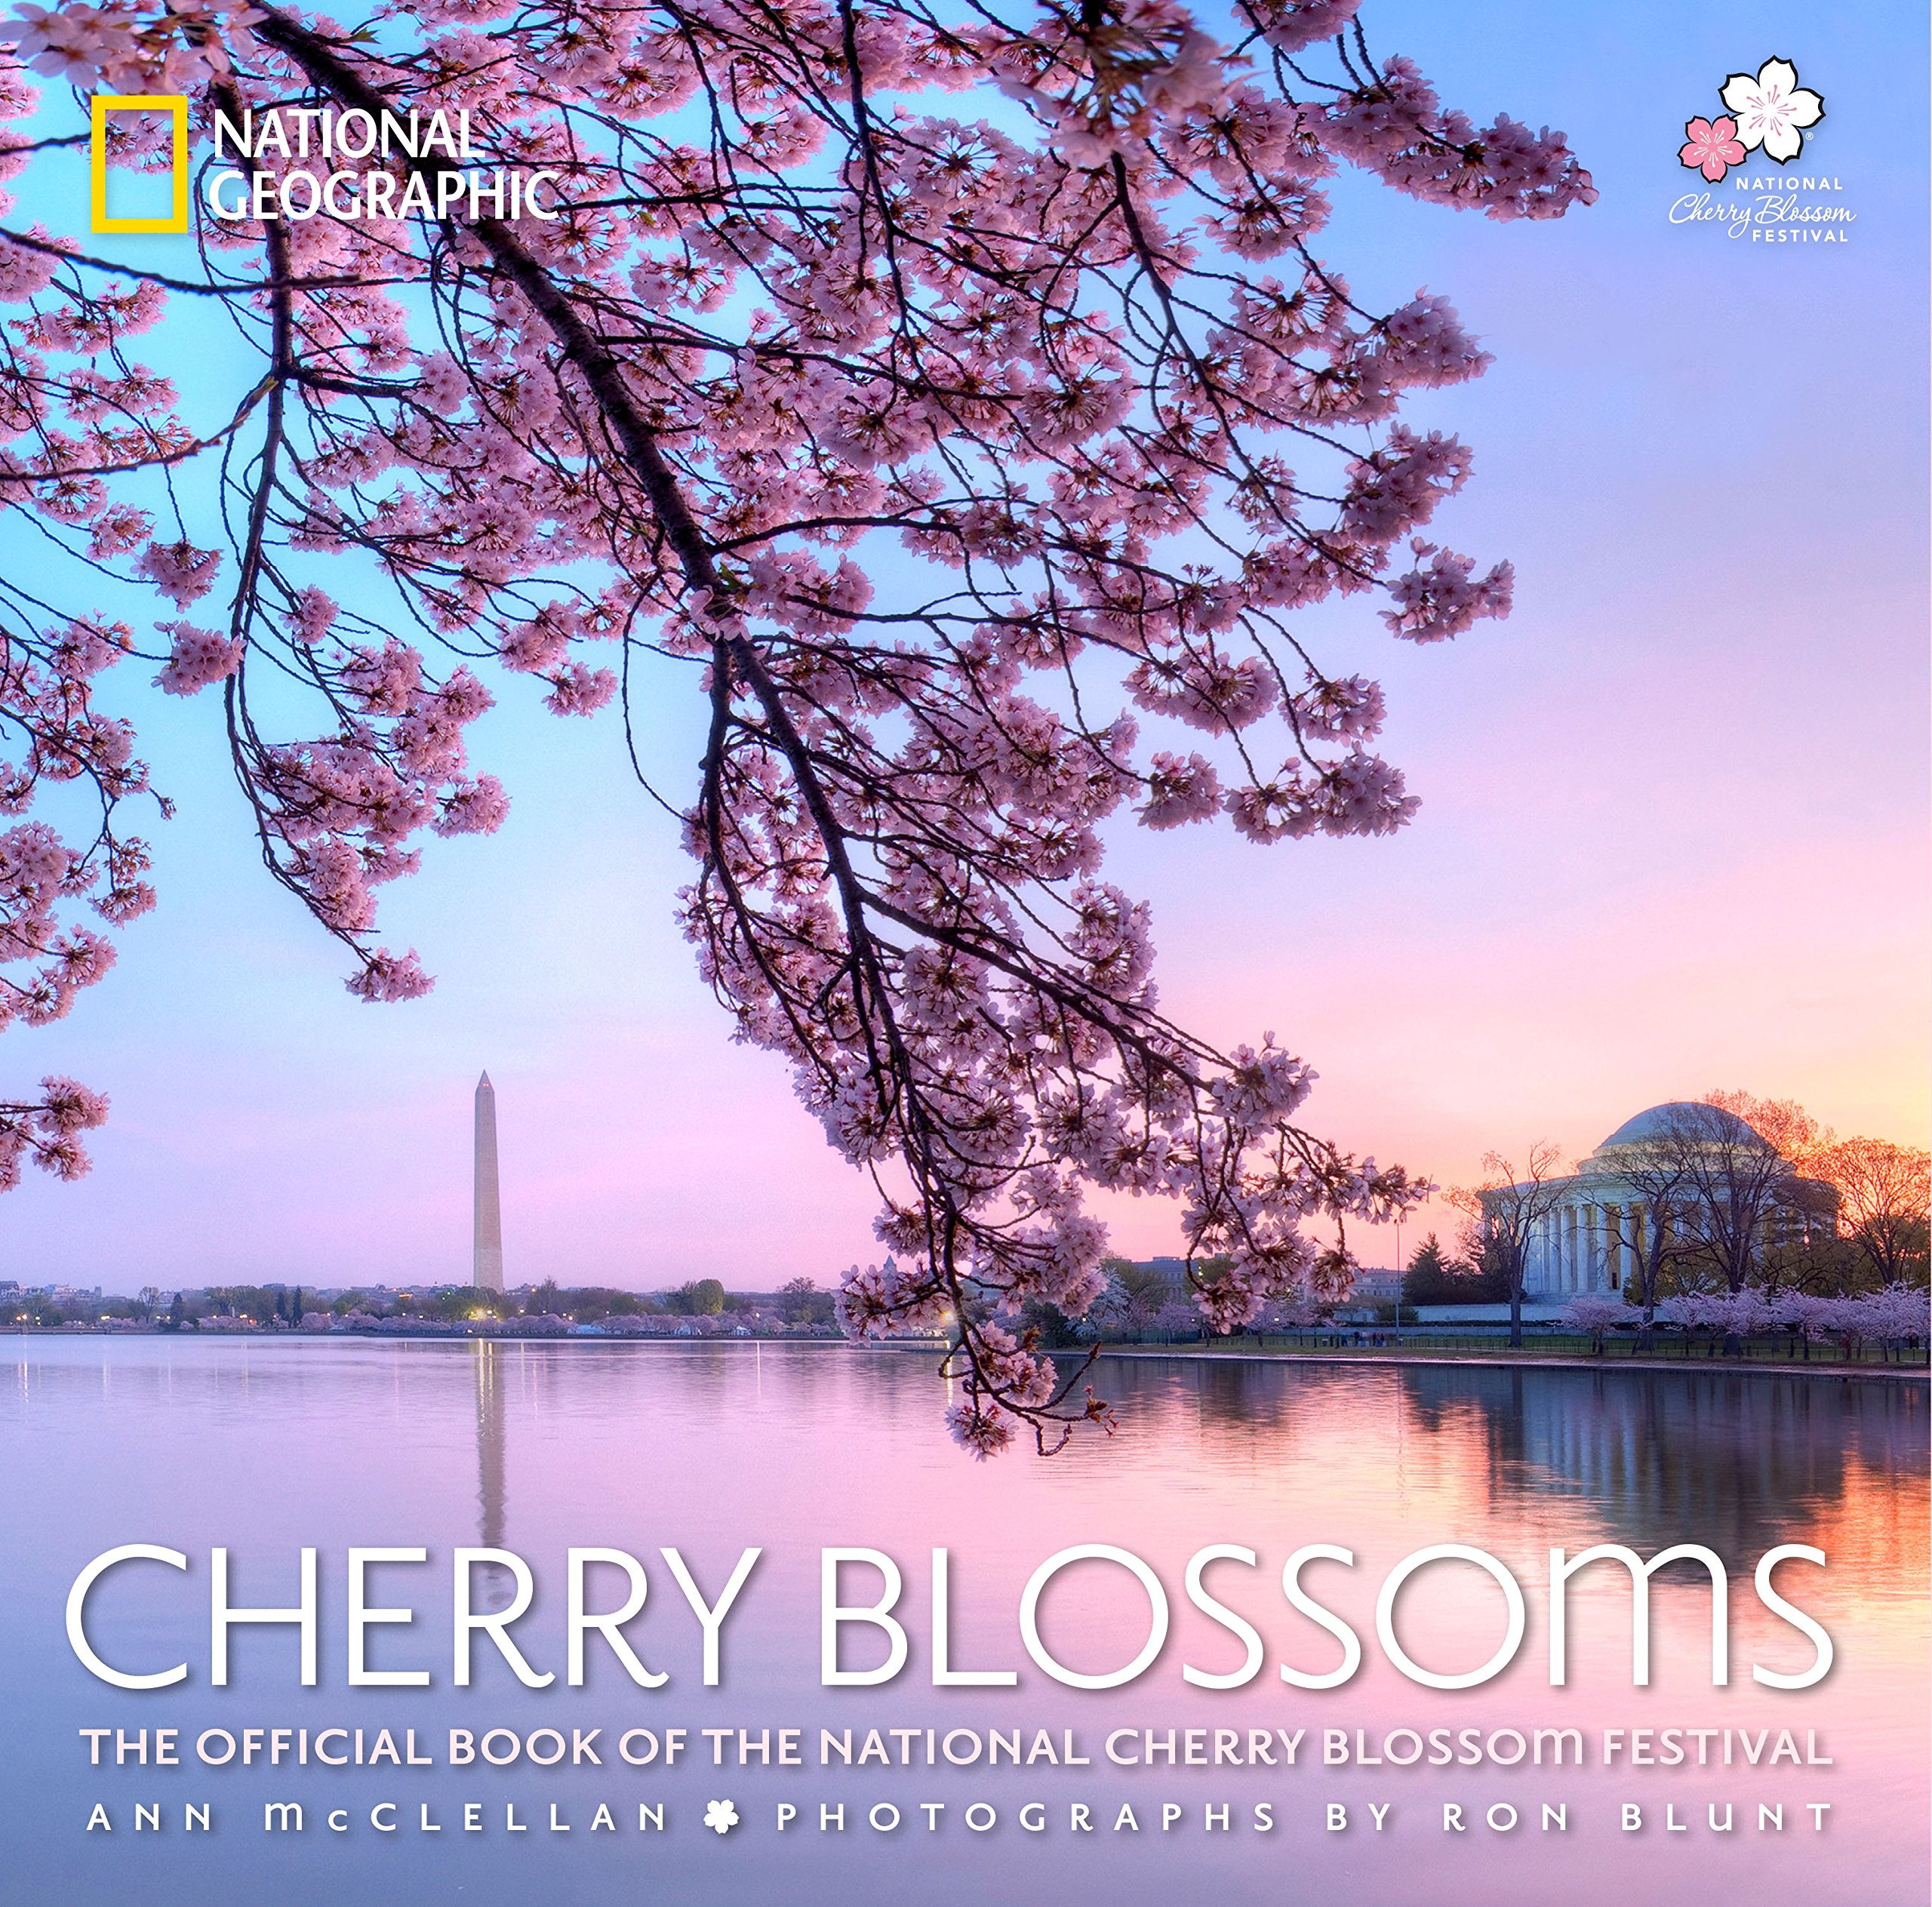 Amazon.com: Cherry Blossoms: The Official Book of the National ...